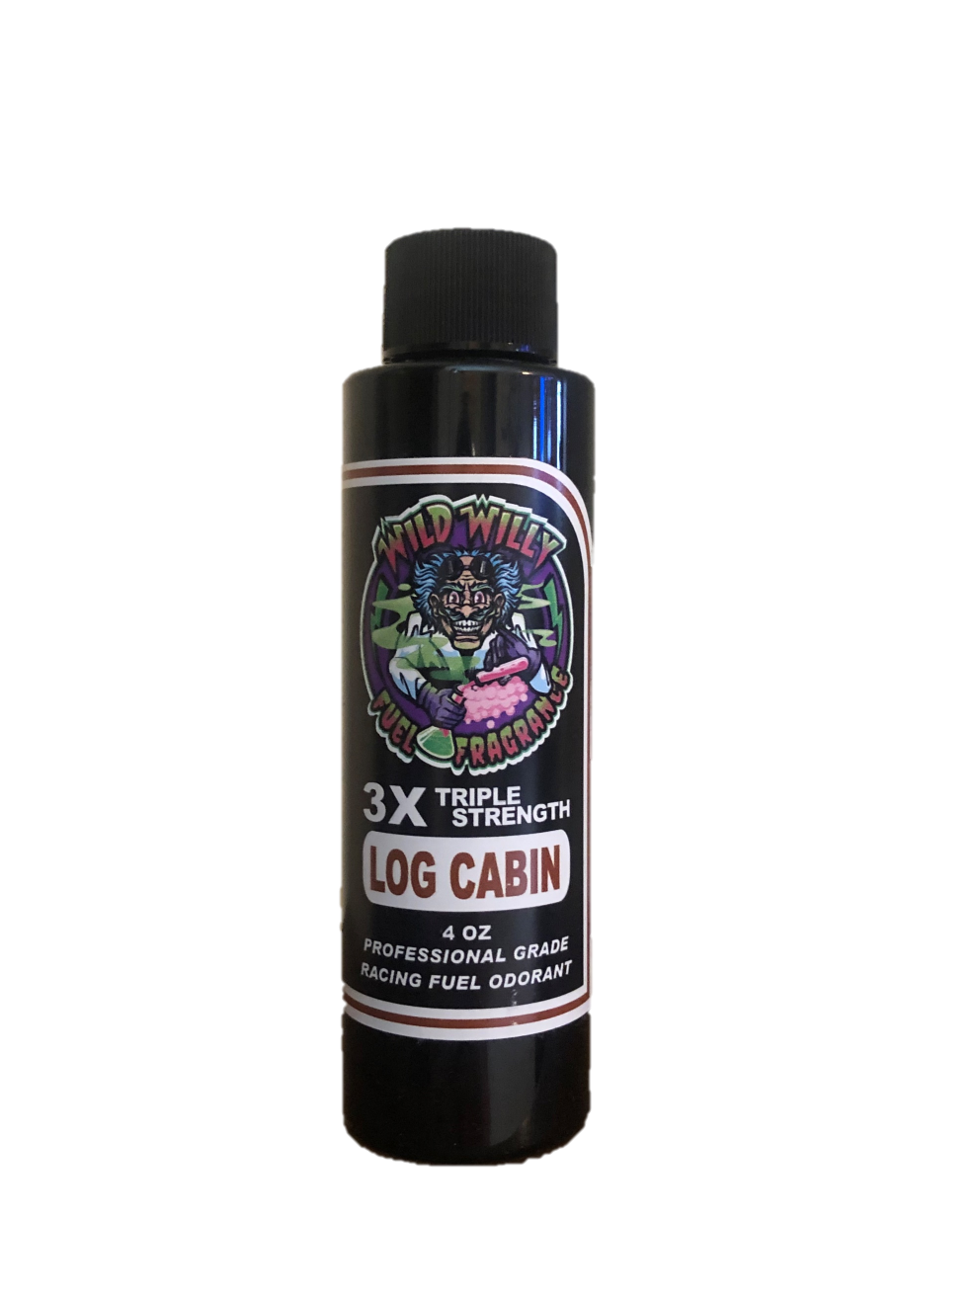 Log Cabin - Wild Willy Fuel Fragrance - 3X Triple Strength!